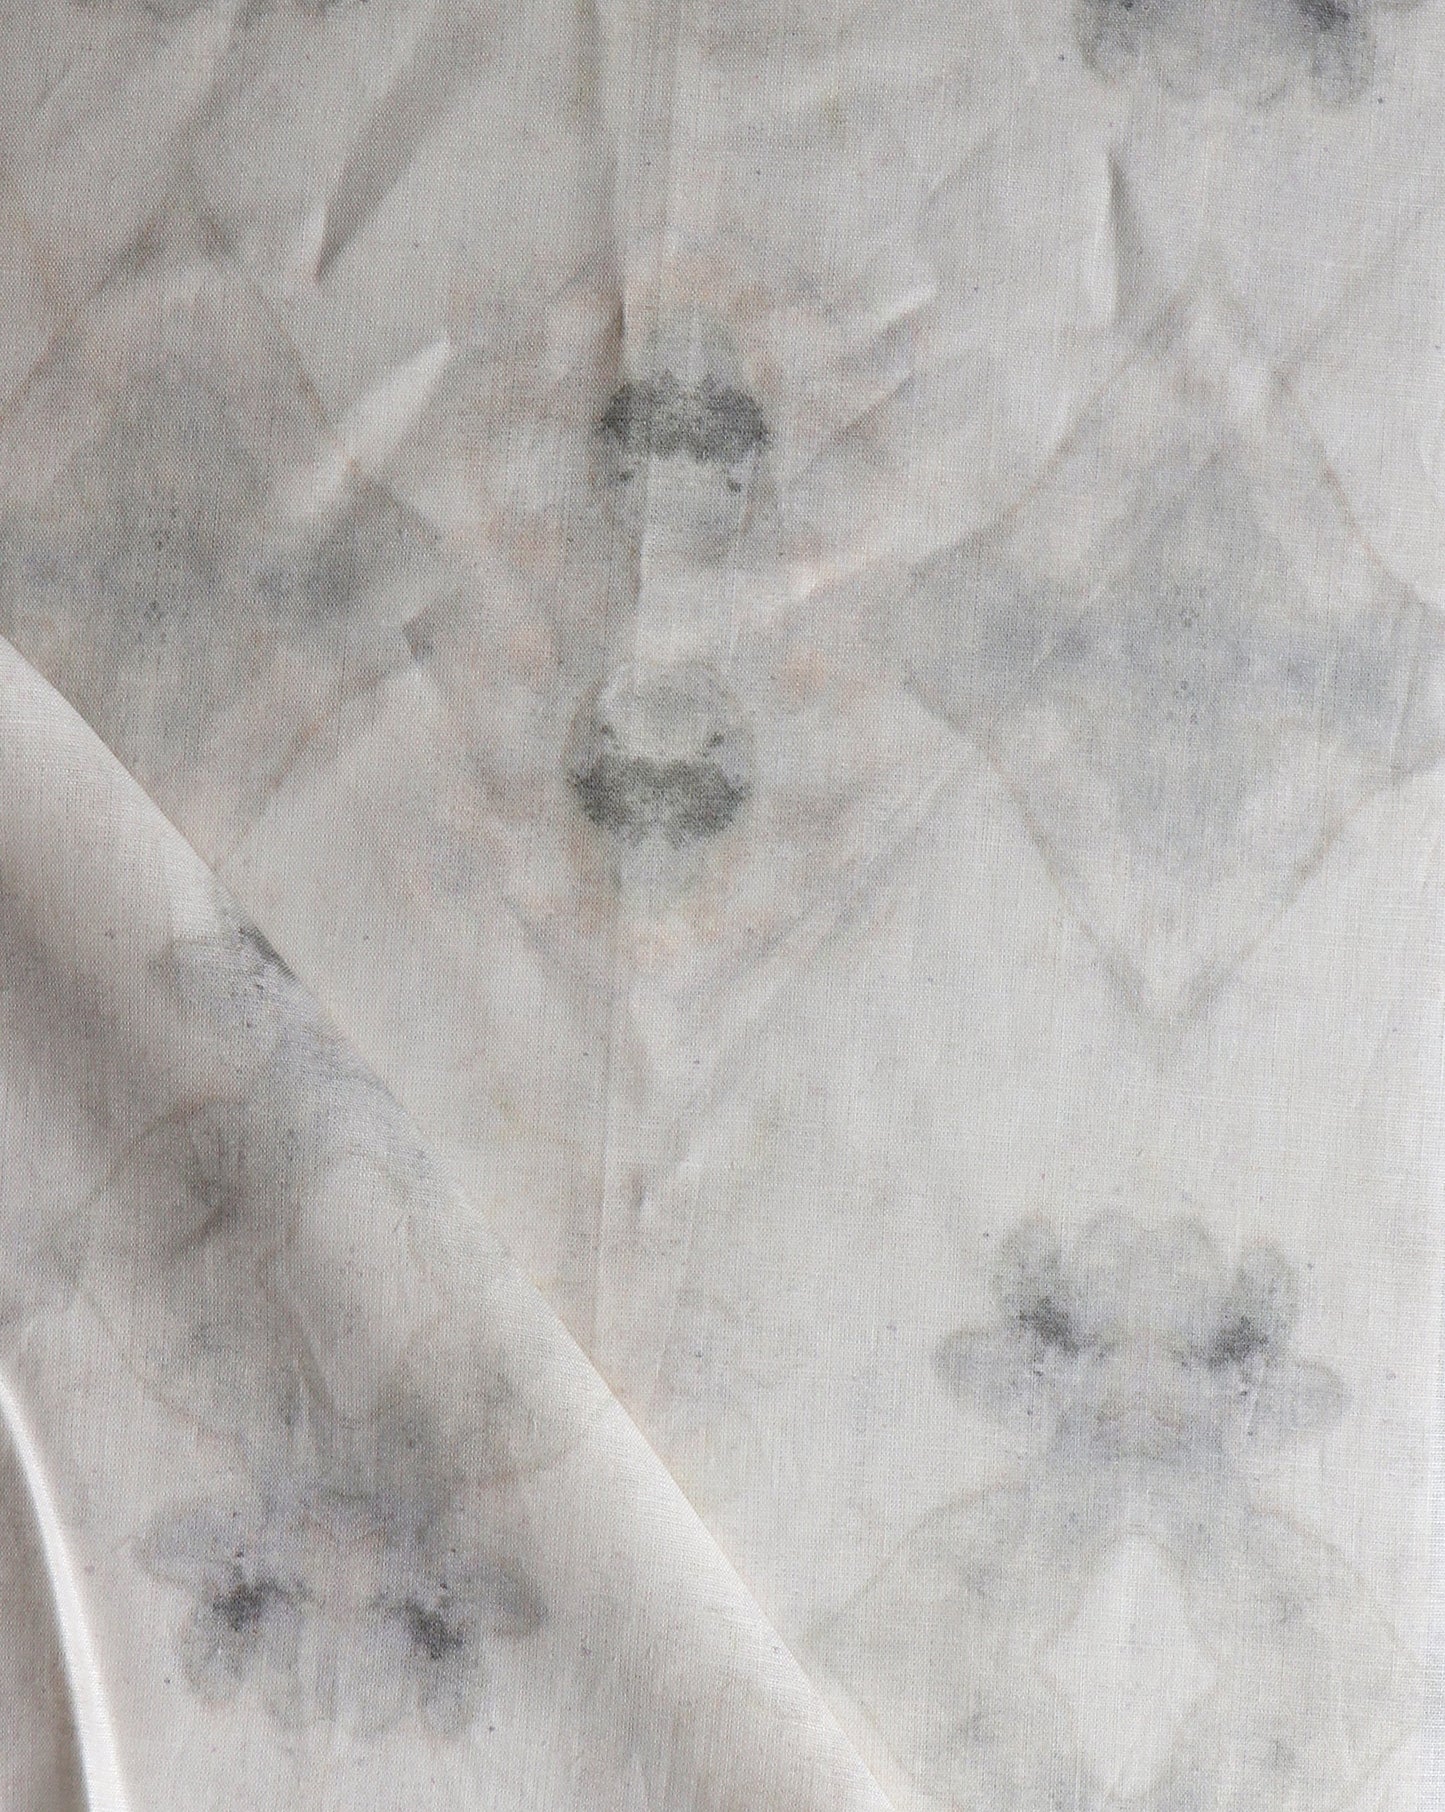 An image of a luxury fabric with a pattern on it from The Teacher Fabric||Cloud collection.